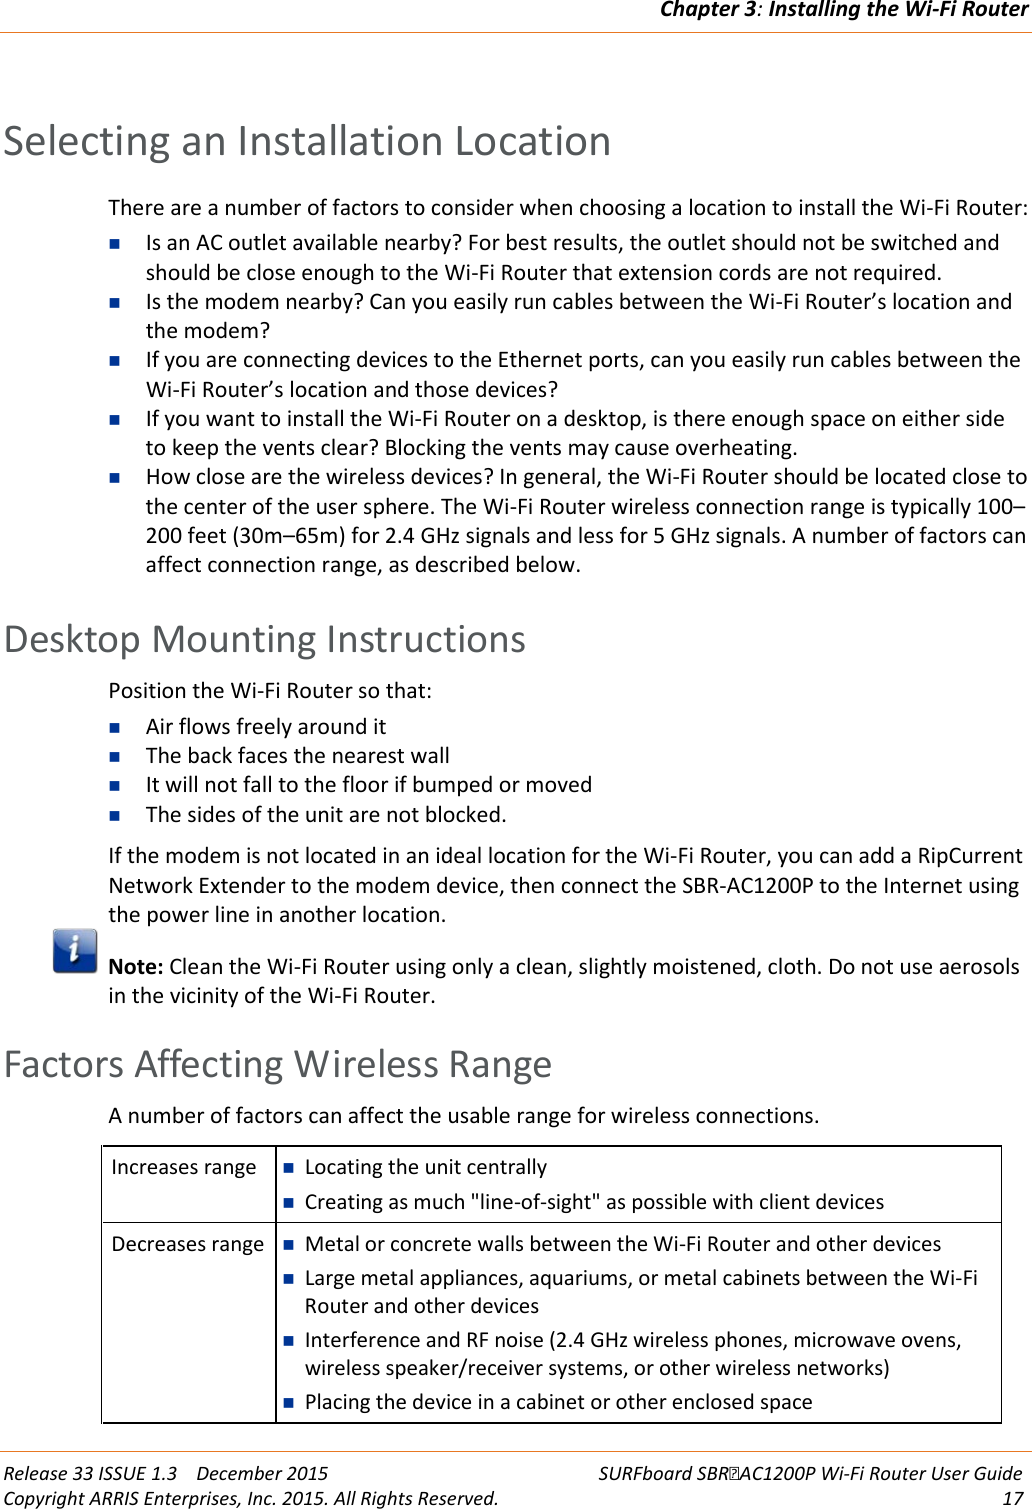 Chapter 3: Installing the Wi-Fi Router  Release 33 ISSUE 1.3    December 2015 SURFboard SBRAC1200P Wi-Fi Router User Guide Copyright ARRIS Enterprises, Inc. 2015. All Rights Reserved. 17   Selecting an Installation Location There are a number of factors to consider when choosing a location to install the Wi-Fi Router:  Is an AC outlet available nearby? For best results, the outlet should not be switched and should be close enough to the Wi-Fi Router that extension cords are not required.  Is the modem nearby? Can you easily run cables between the Wi-Fi Router’s location and the modem?  If you are connecting devices to the Ethernet ports, can you easily run cables between the Wi-Fi Router’s location and those devices?  If you want to install the Wi-Fi Router on a desktop, is there enough space on either side to keep the vents clear? Blocking the vents may cause overheating.  How close are the wireless devices? In general, the Wi-Fi Router should be located close to the center of the user sphere. The Wi-Fi Router wireless connection range is typically 100–200 feet (30m–65m) for 2.4 GHz signals and less for 5 GHz signals. A number of factors can affect connection range, as described below.   Desktop Mounting Instructions Position the Wi-Fi Router so that:  Air flows freely around it  The back faces the nearest wall  It will not fall to the floor if bumped or moved  The sides of the unit are not blocked. If the modem is not located in an ideal location for the Wi-Fi Router, you can add a RipCurrent Network Extender to the modem device, then connect the SBR-AC1200P to the Internet using the power line in another location.  Note: Clean the Wi-Fi Router using only a clean, slightly moistened, cloth. Do not use aerosols in the vicinity of the Wi-Fi Router.   Factors Affecting Wireless Range A number of factors can affect the usable range for wireless connections.  Increases range  Locating the unit centrally  Creating as much &quot;line-of-sight&quot; as possible with client devices Decreases range  Metal or concrete walls between the Wi-Fi Router and other devices  Large metal appliances, aquariums, or metal cabinets between the Wi-Fi Router and other devices  Interference and RF noise (2.4 GHz wireless phones, microwave ovens, wireless speaker/receiver systems, or other wireless networks)  Placing the device in a cabinet or other enclosed space  